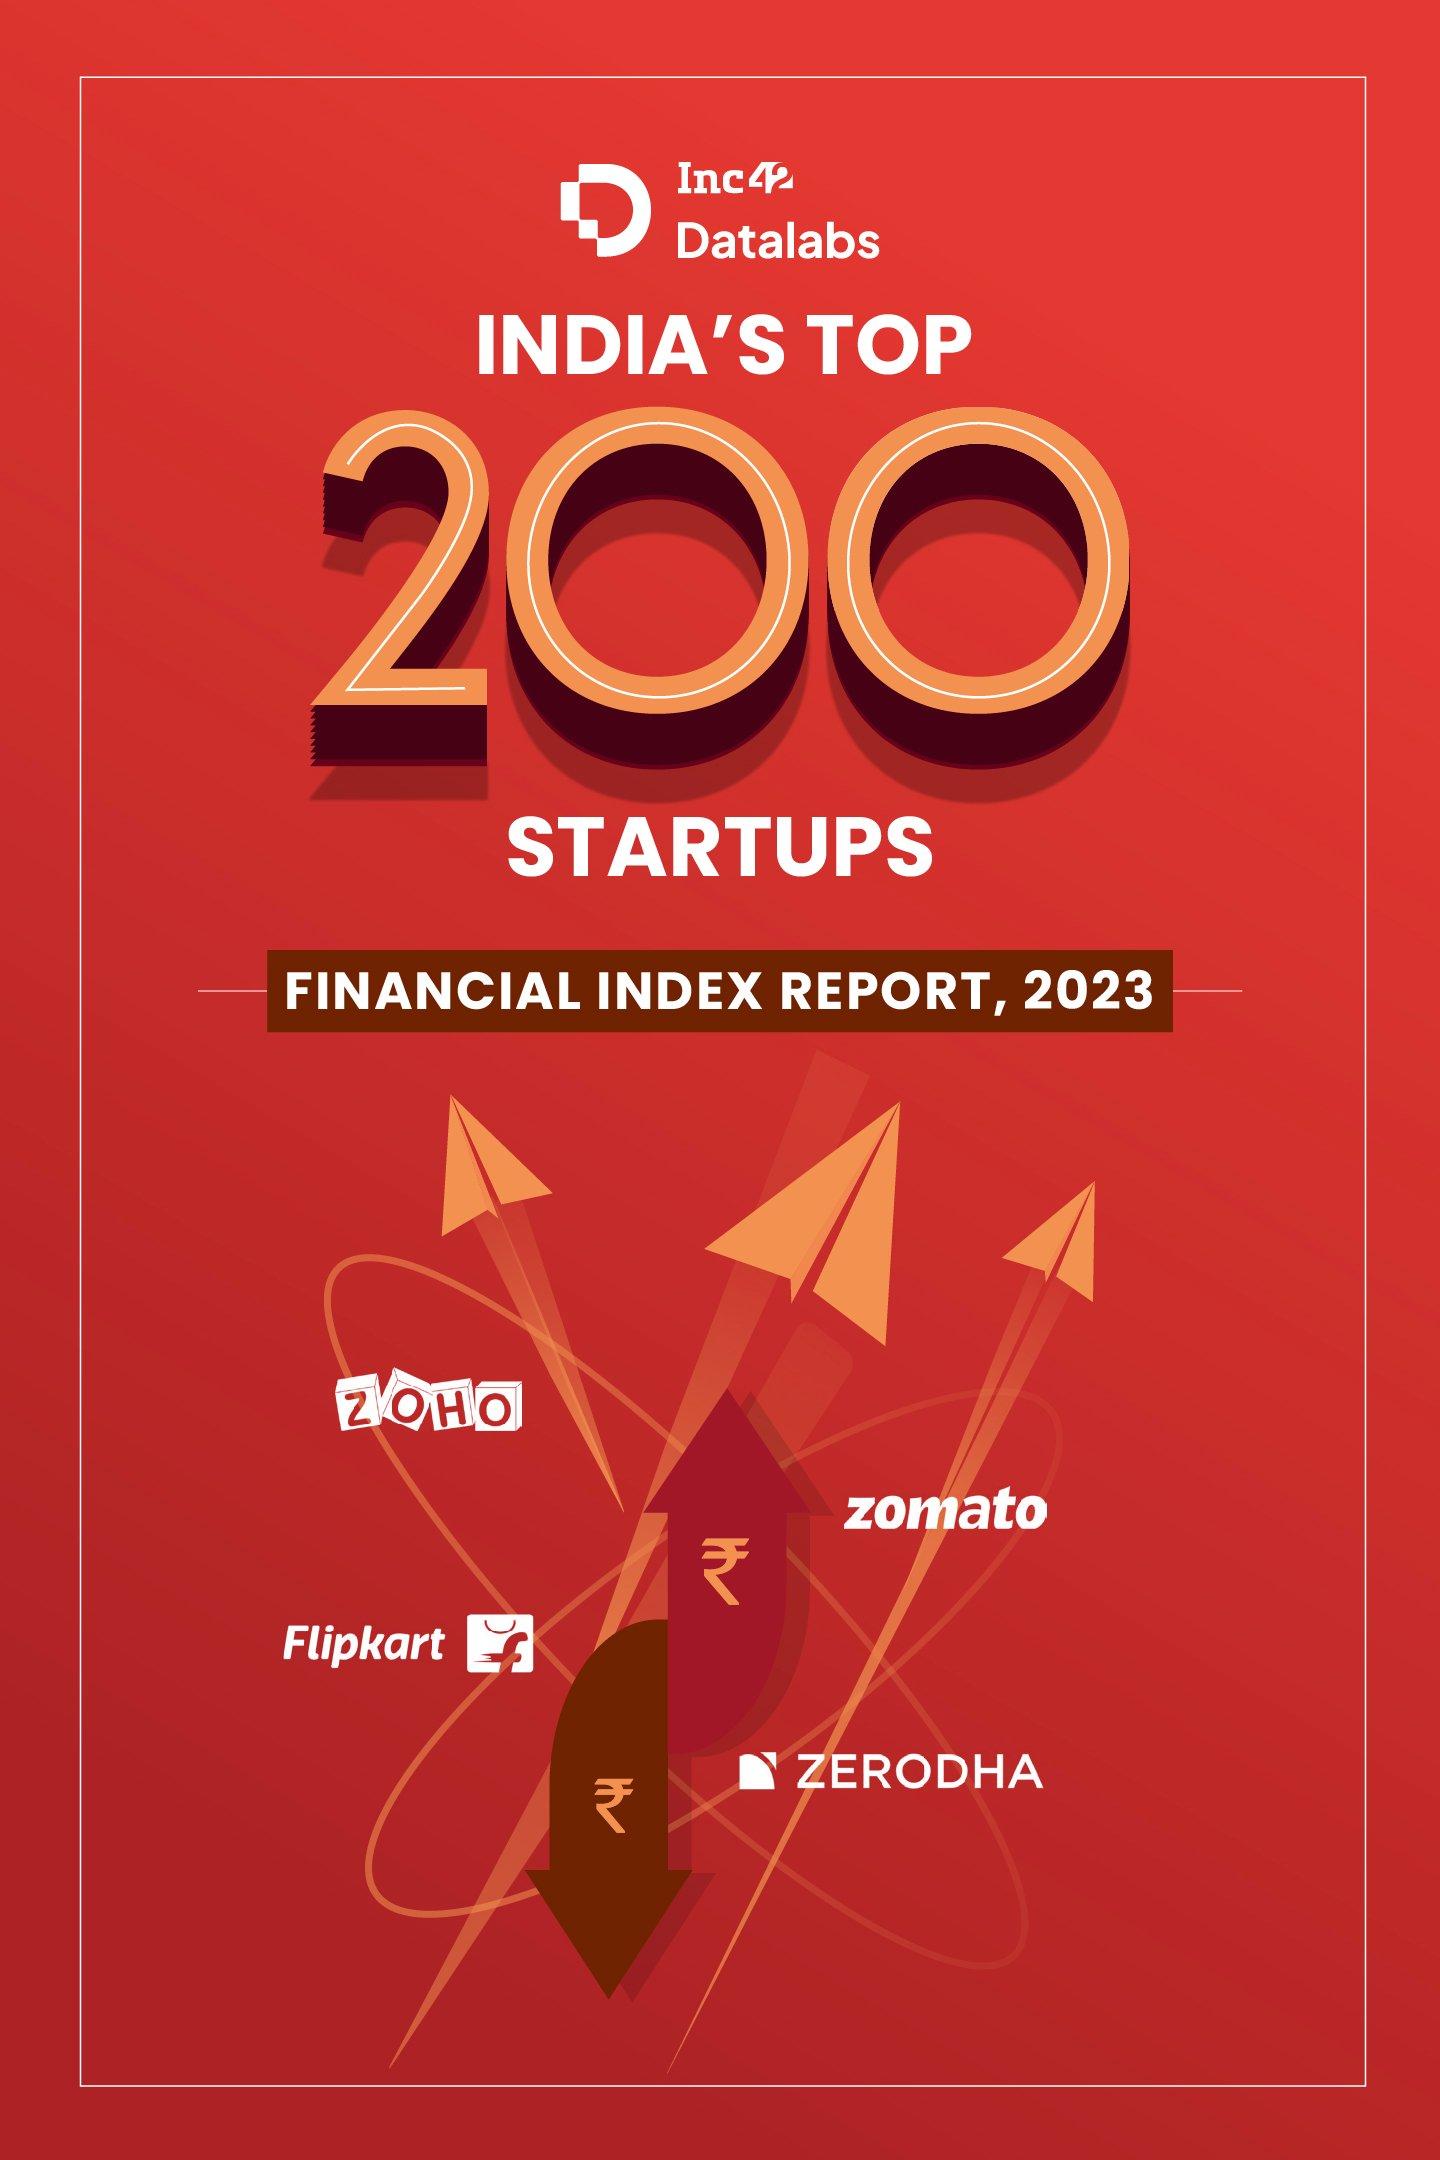 India’s Top 200 Startups Financial Index Report, 2023